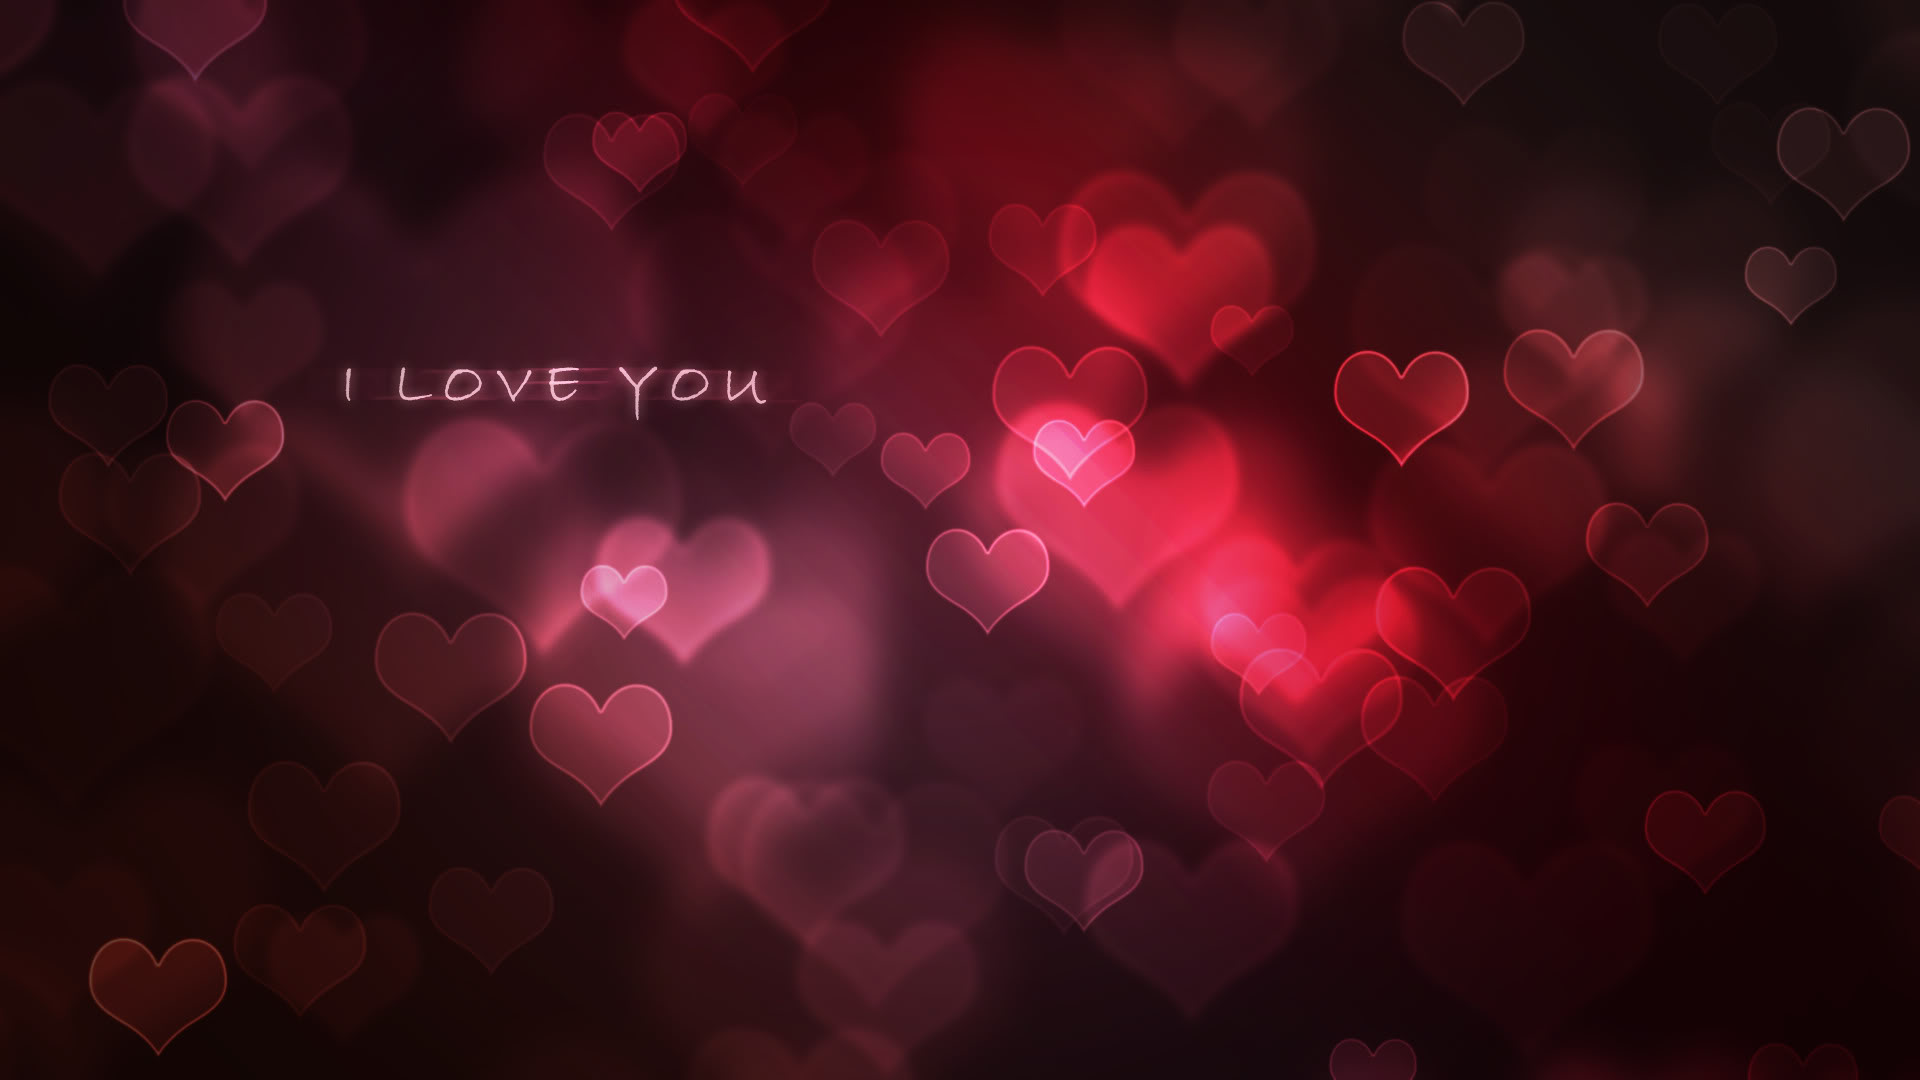 Love Wallpaper For Sms In